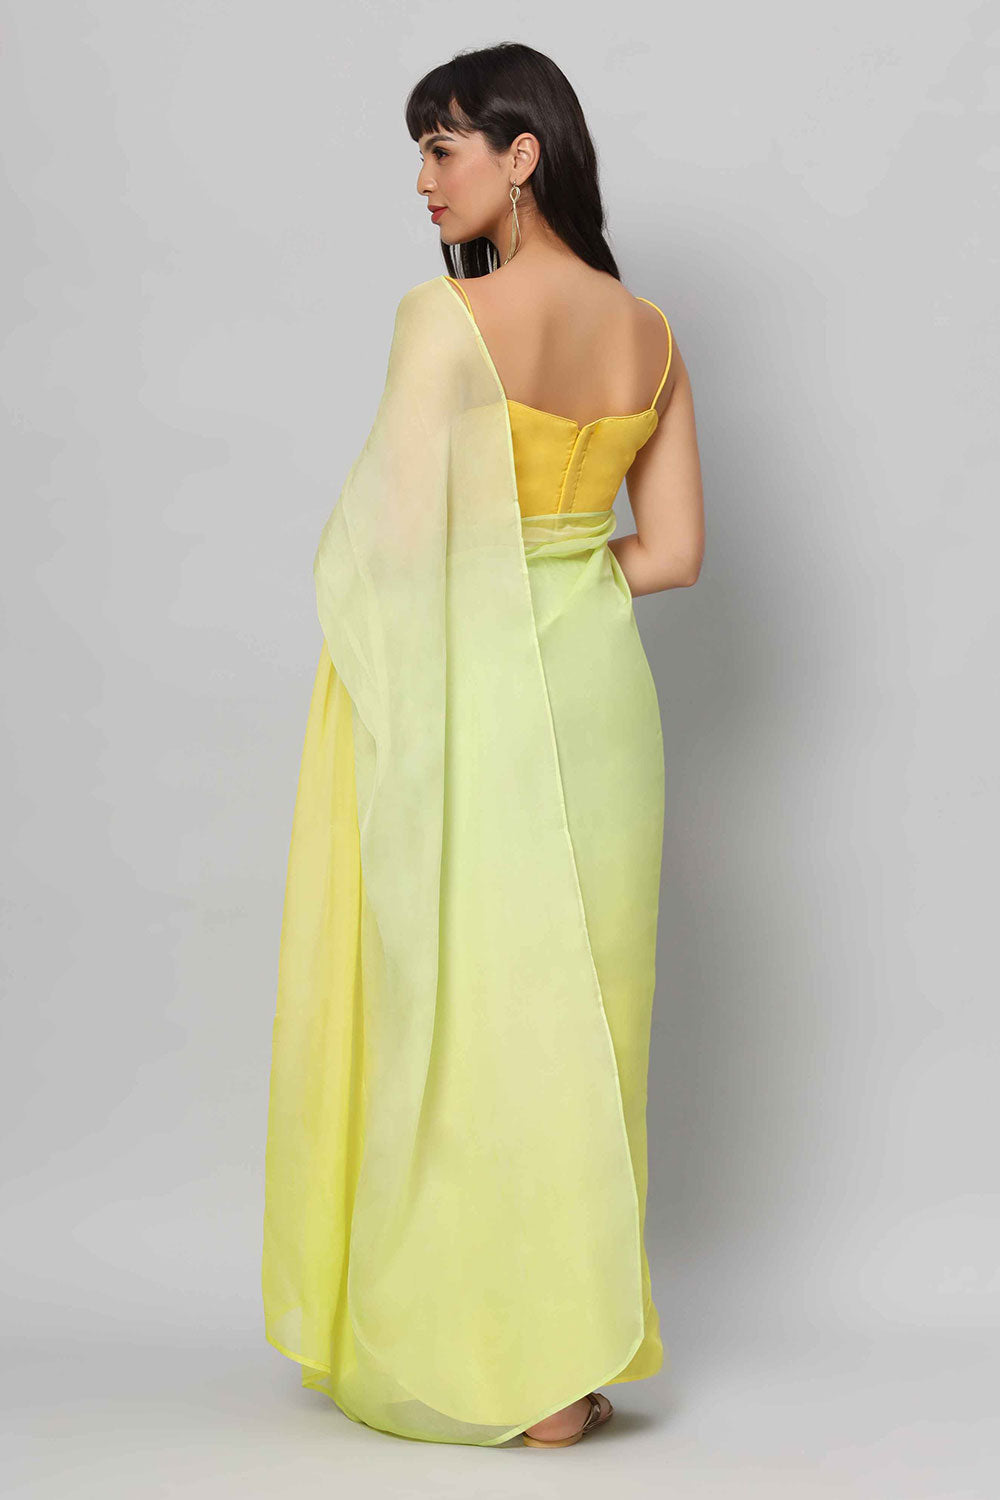 Shop Liza Multi-Shaded Yellow Soft Organza One Minute Saree at best offer at our  Store - One Minute Saree